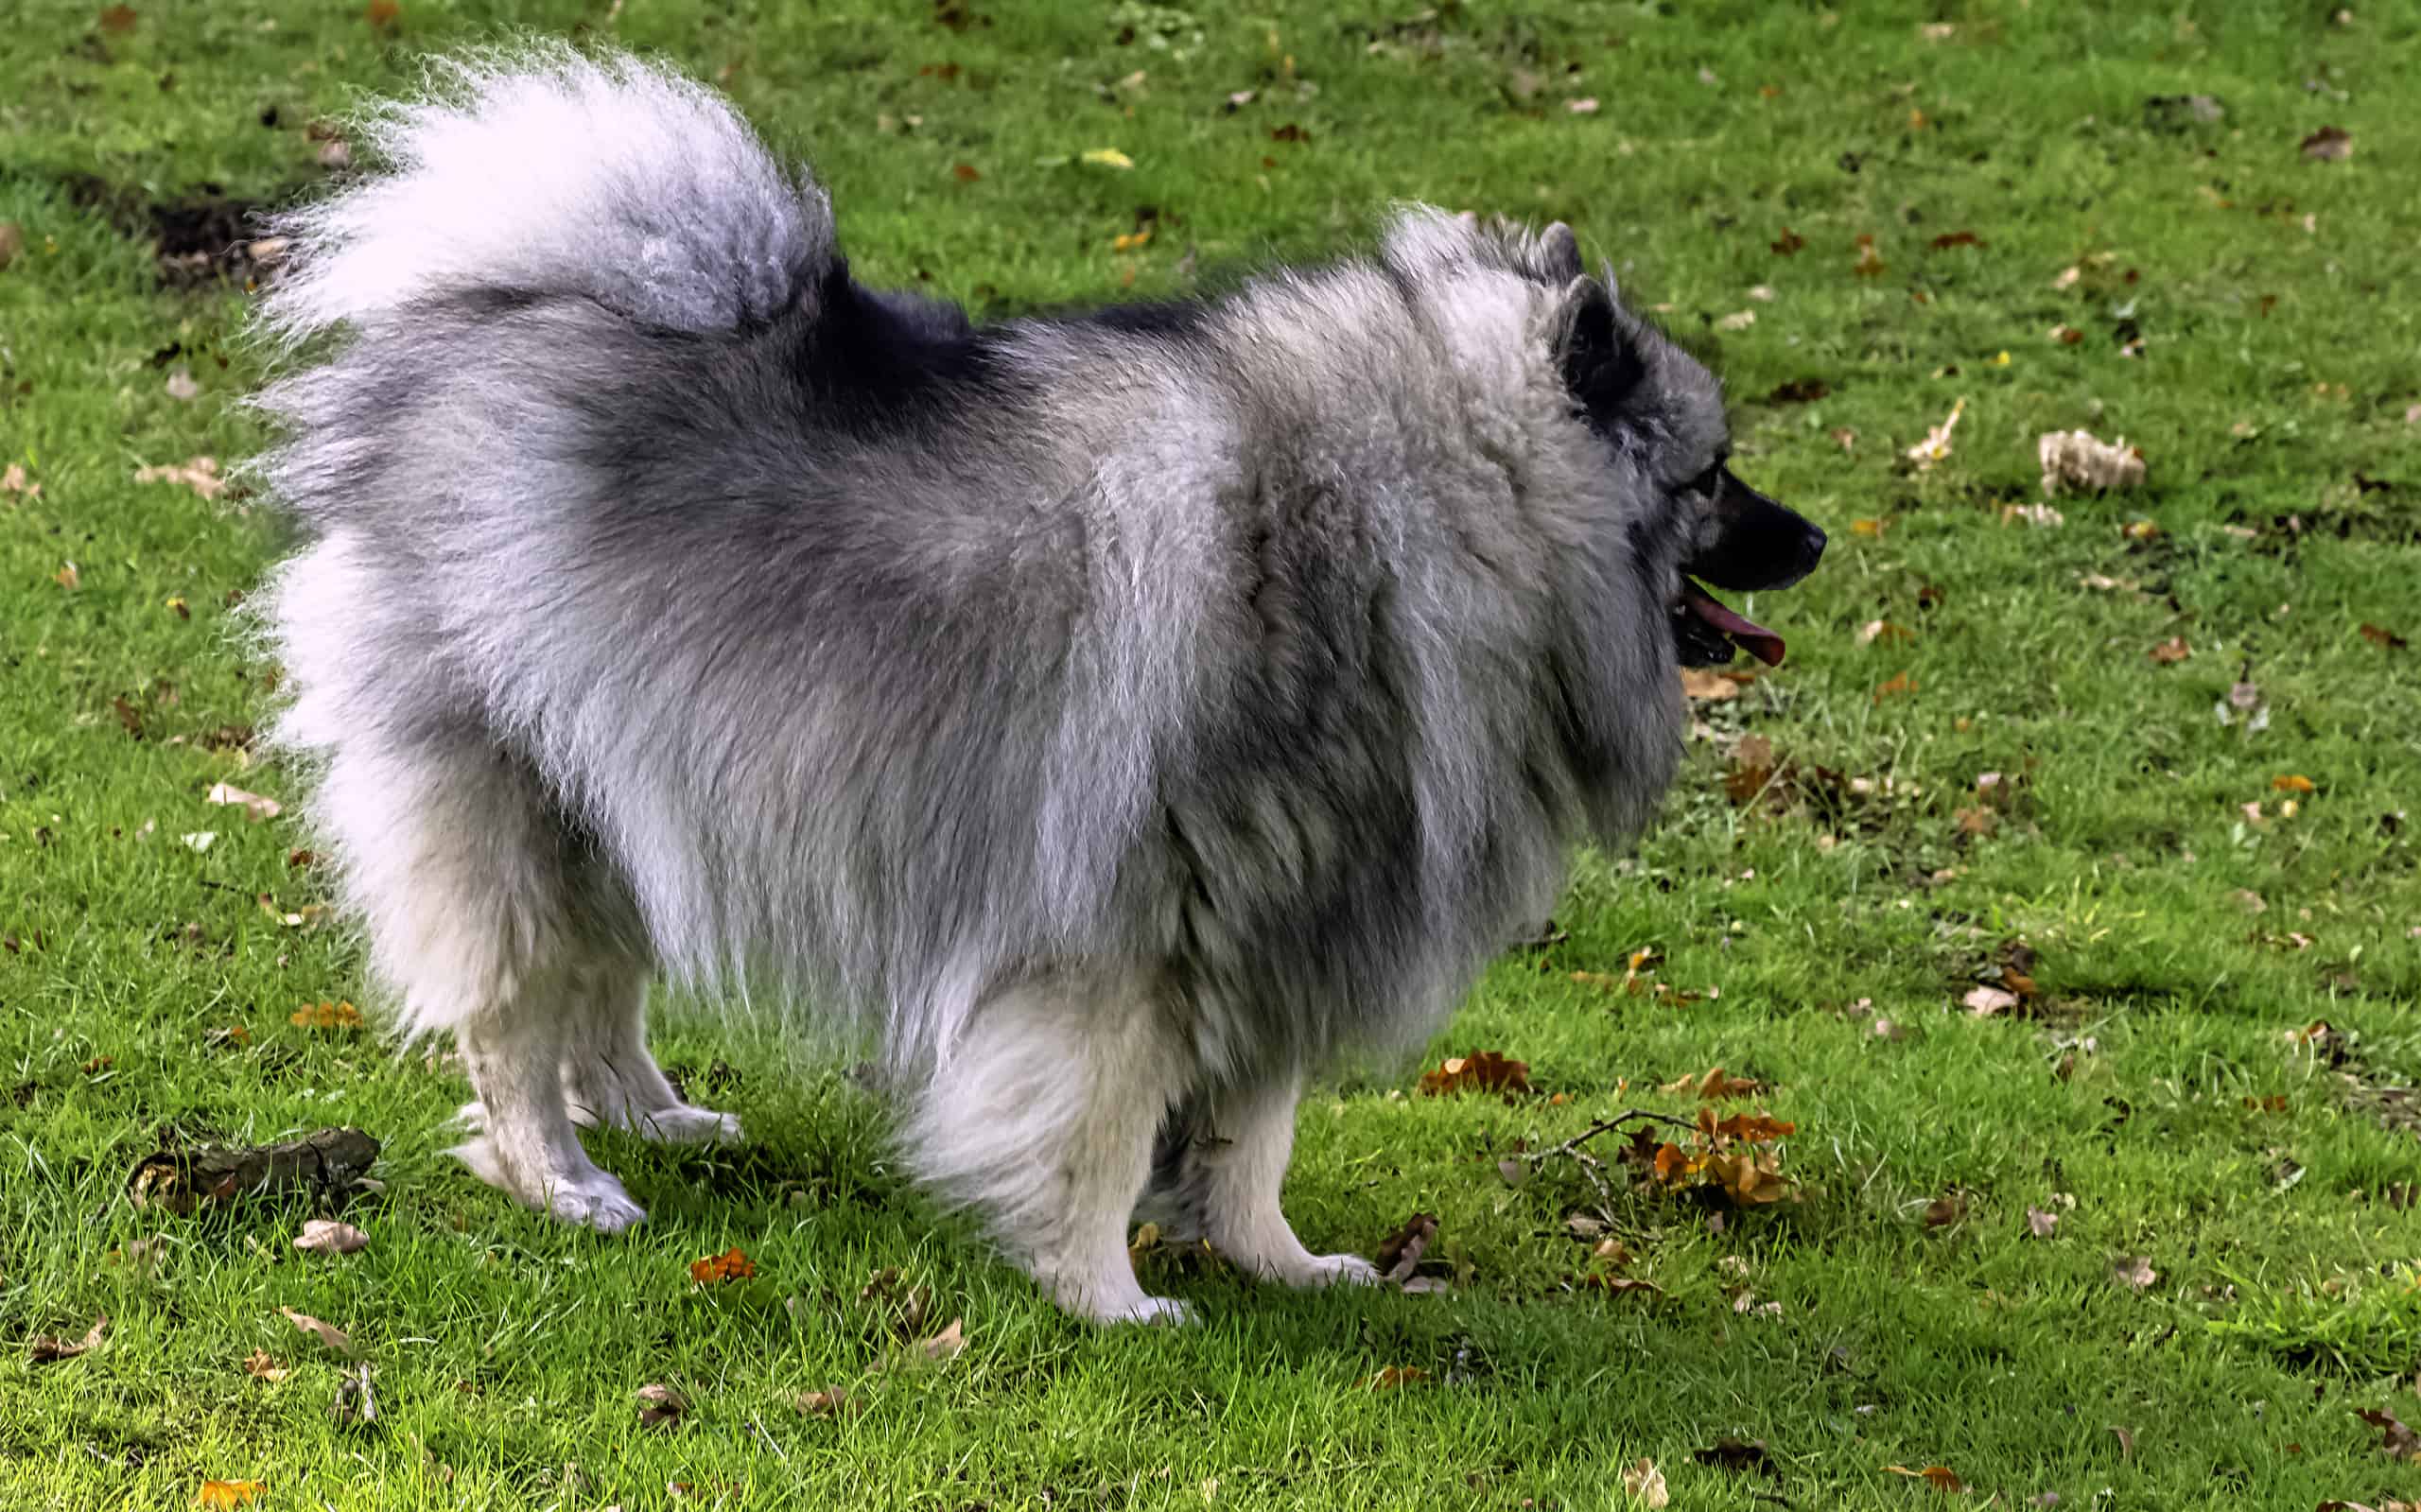 Keeshond is a medium-sized dog with a plush, two-layer coat of silver and black fur with a ruff and a curled tail